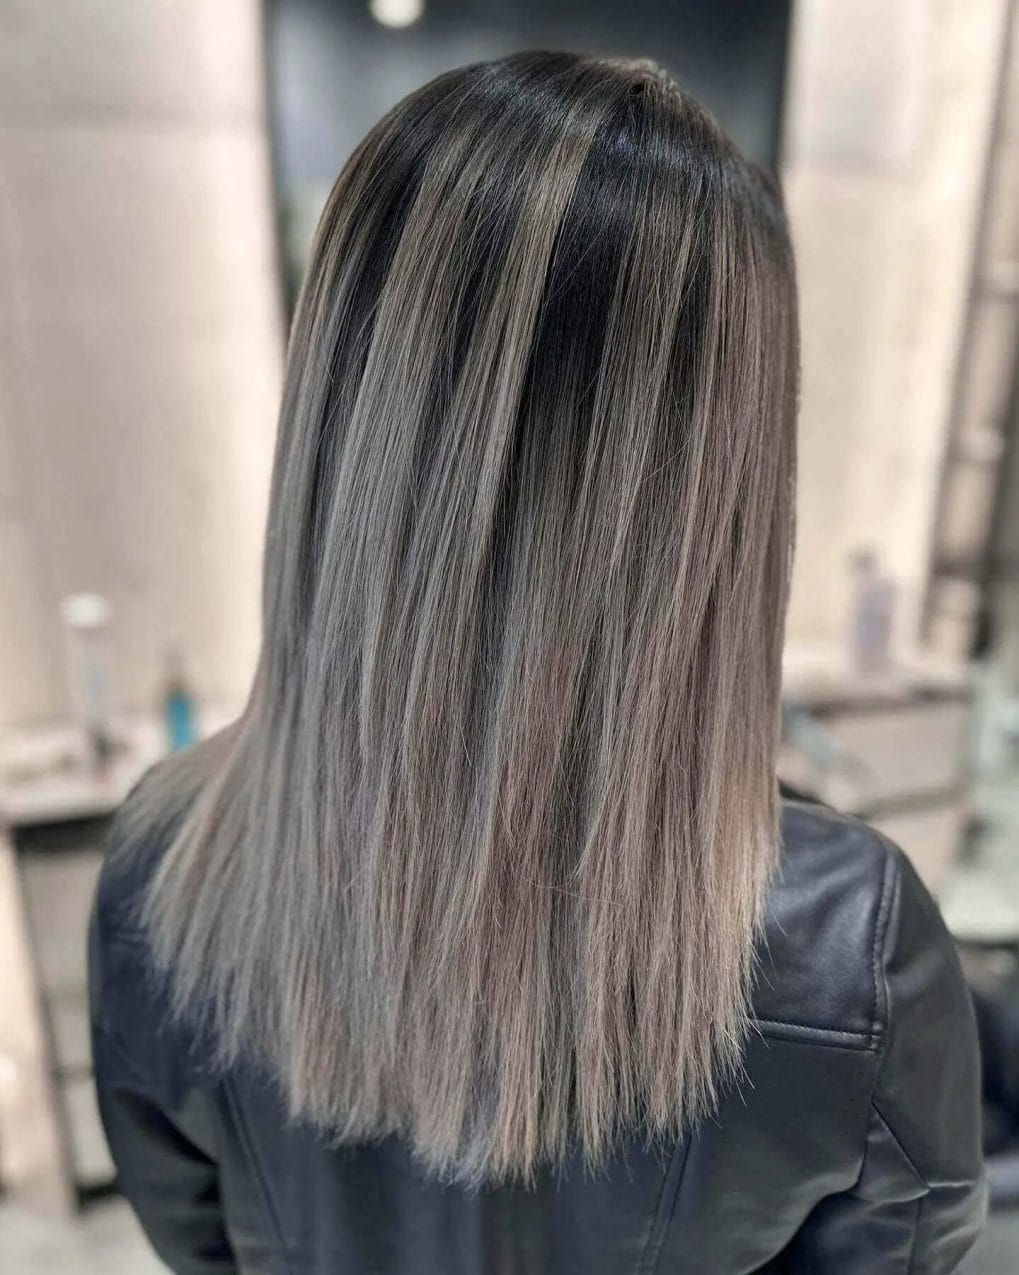 Sleek, shoulder-length hair with dark roots and silvery ash balayage.